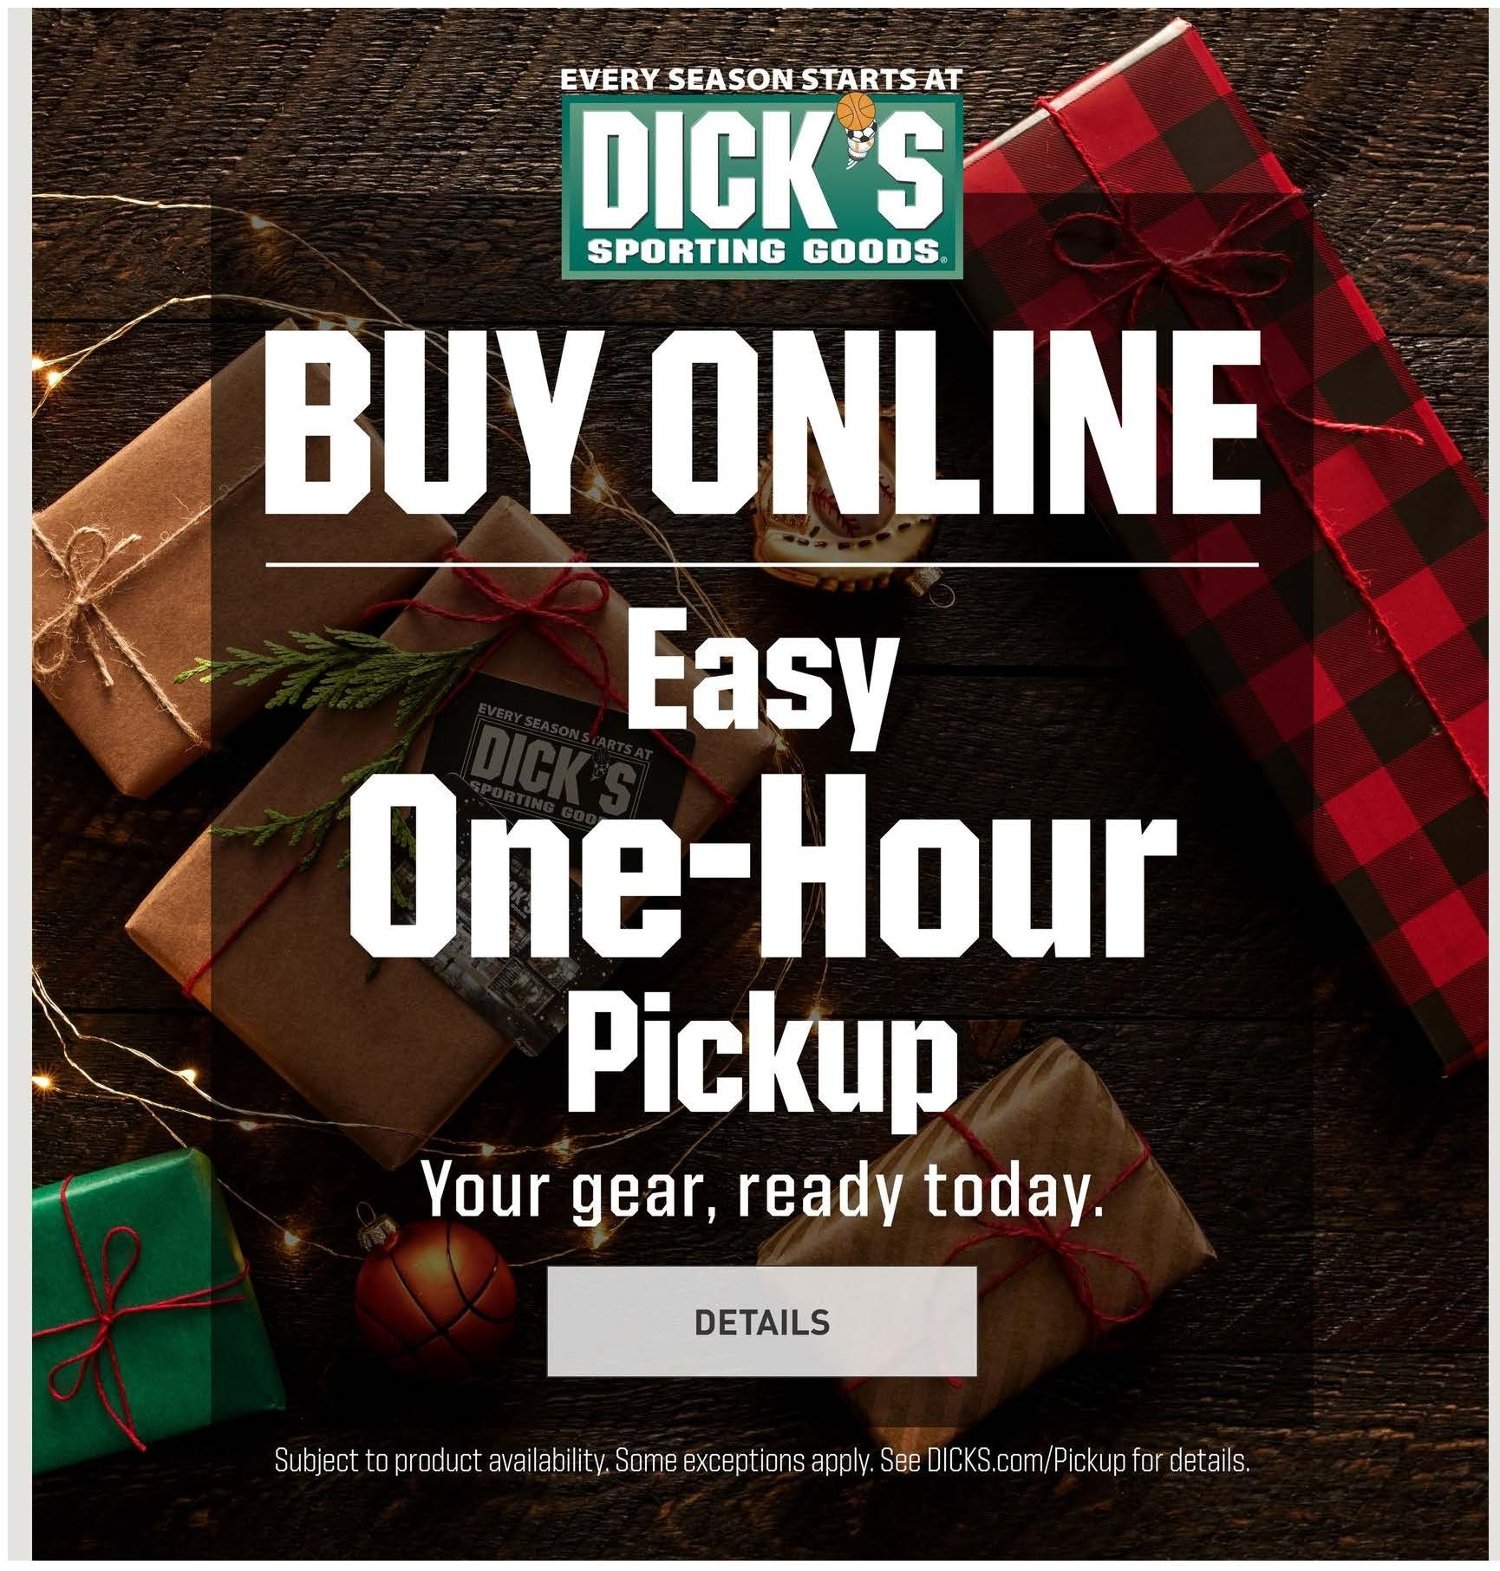 Dick's Sporting Goods Cyber Monday 2020 Ad